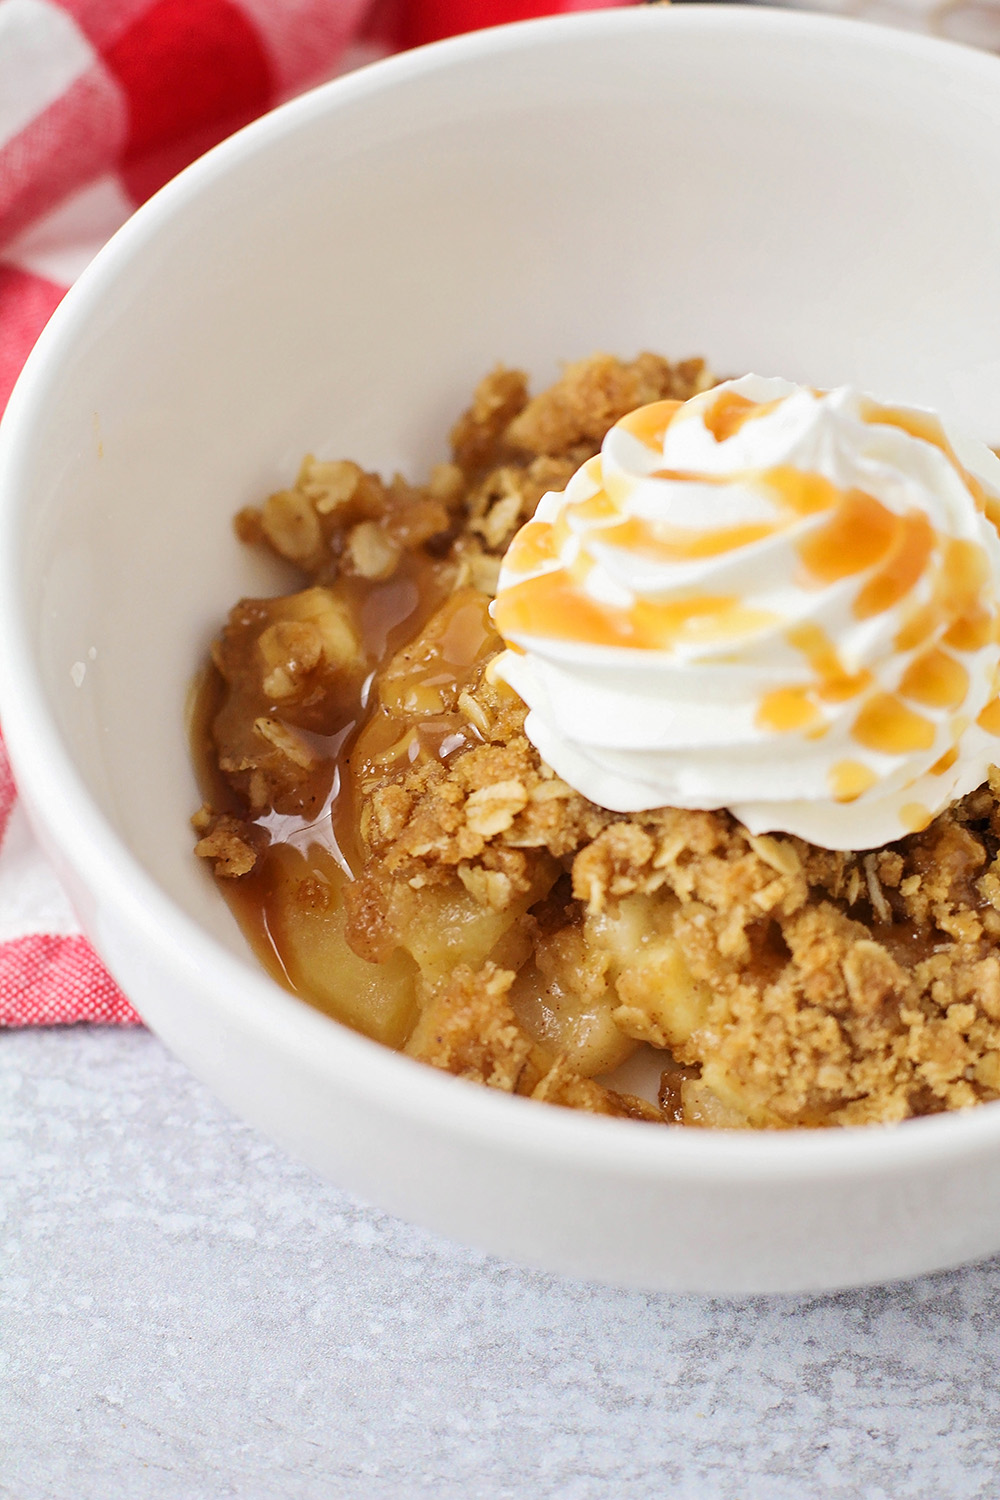 This delicious apple crisp has tender juicy apples topped with buttery and sweet crisp topping. It's the perfect fall dessert!